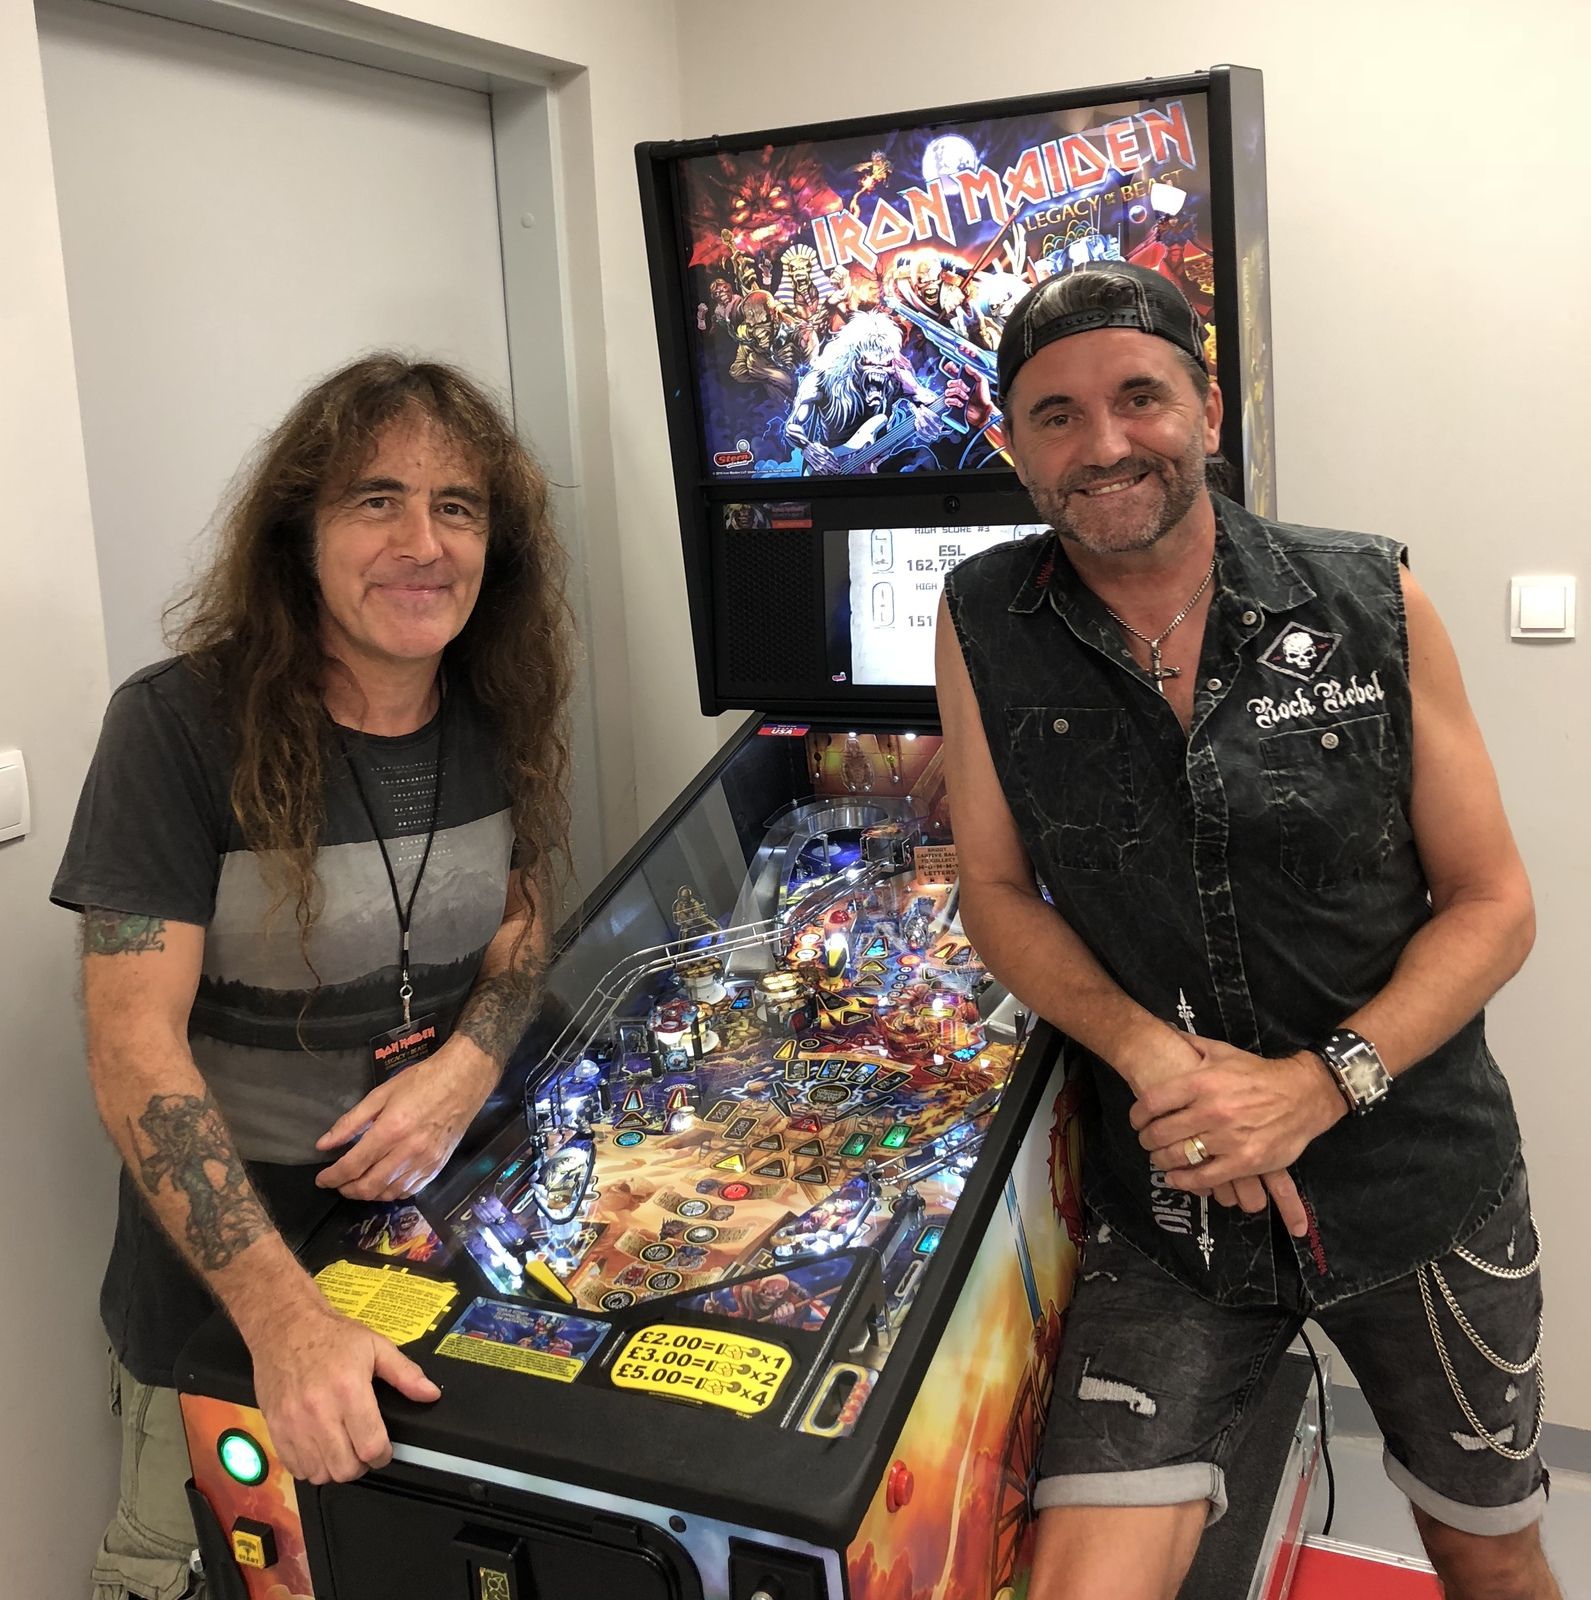 Iron Maiden's Steve Harris speaks to Planet Rock's Paul Anthony backstage in Poland